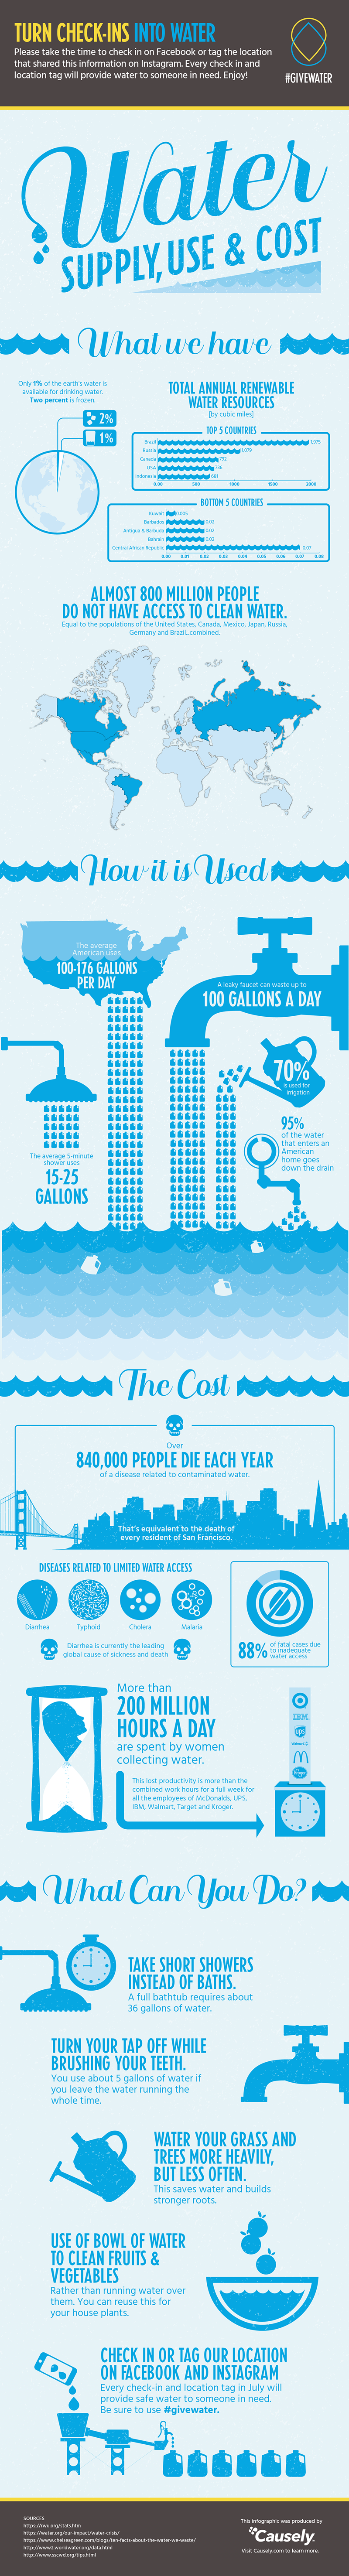 Water_infographic-01.png